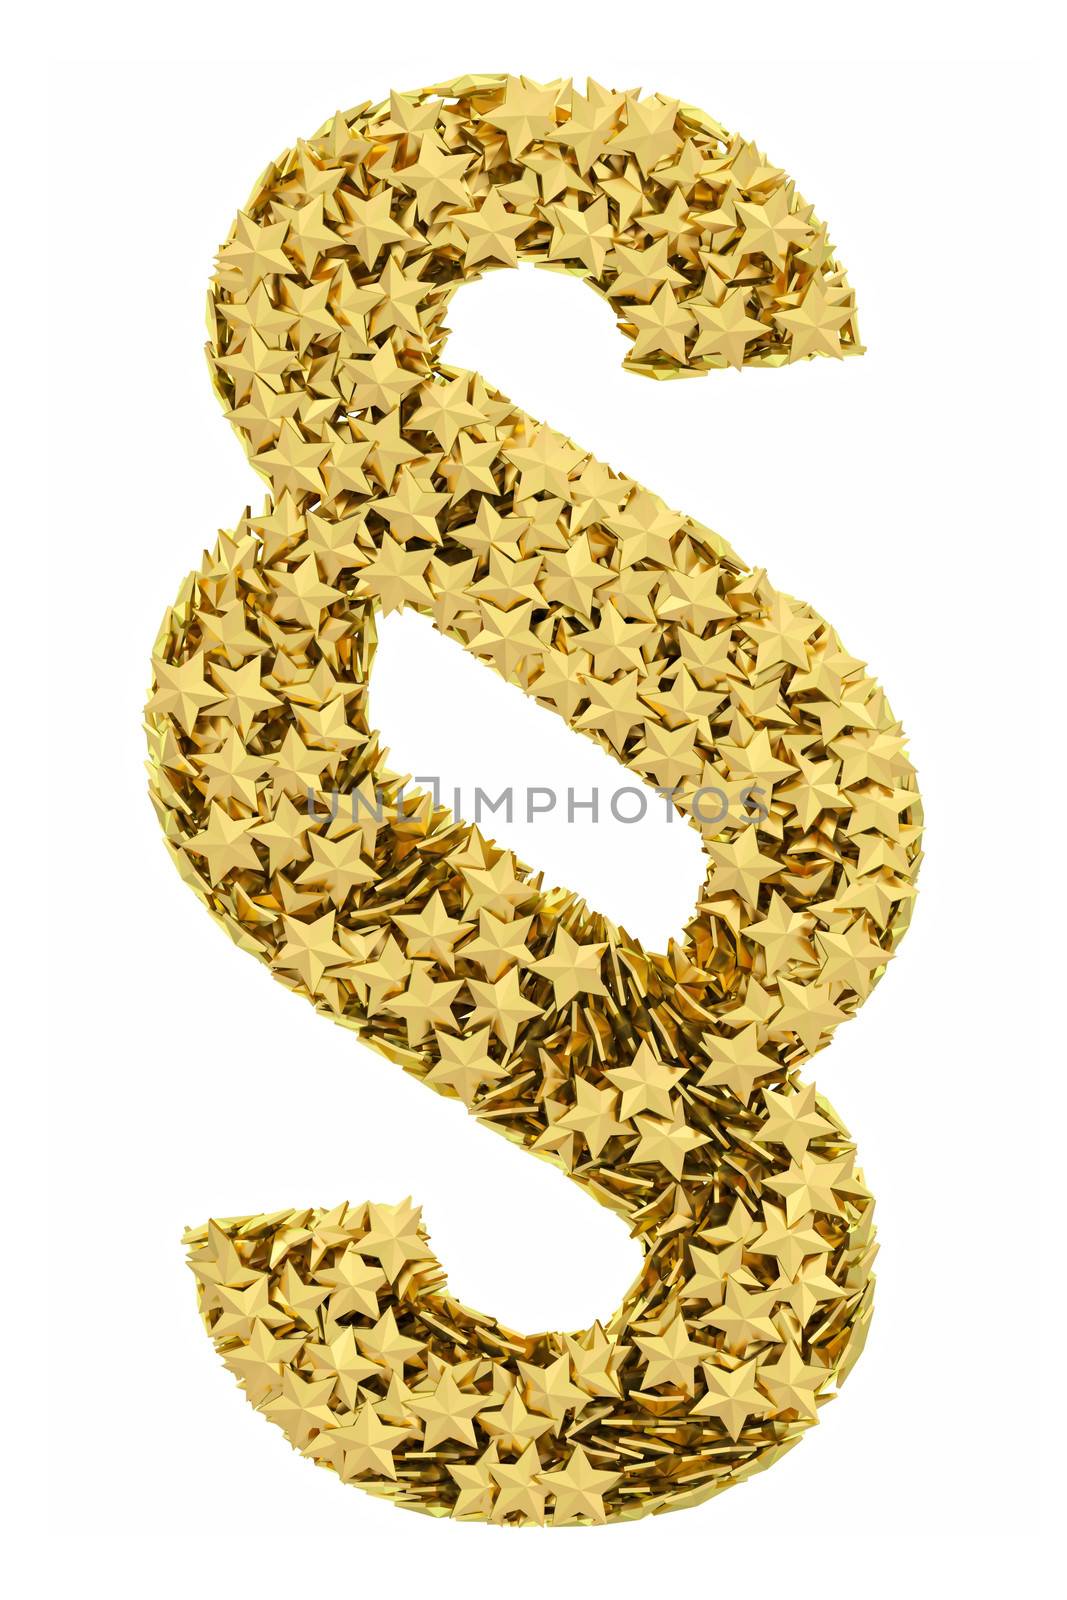 Section sign composed of golden stars isolated on white. High resolution 3D image